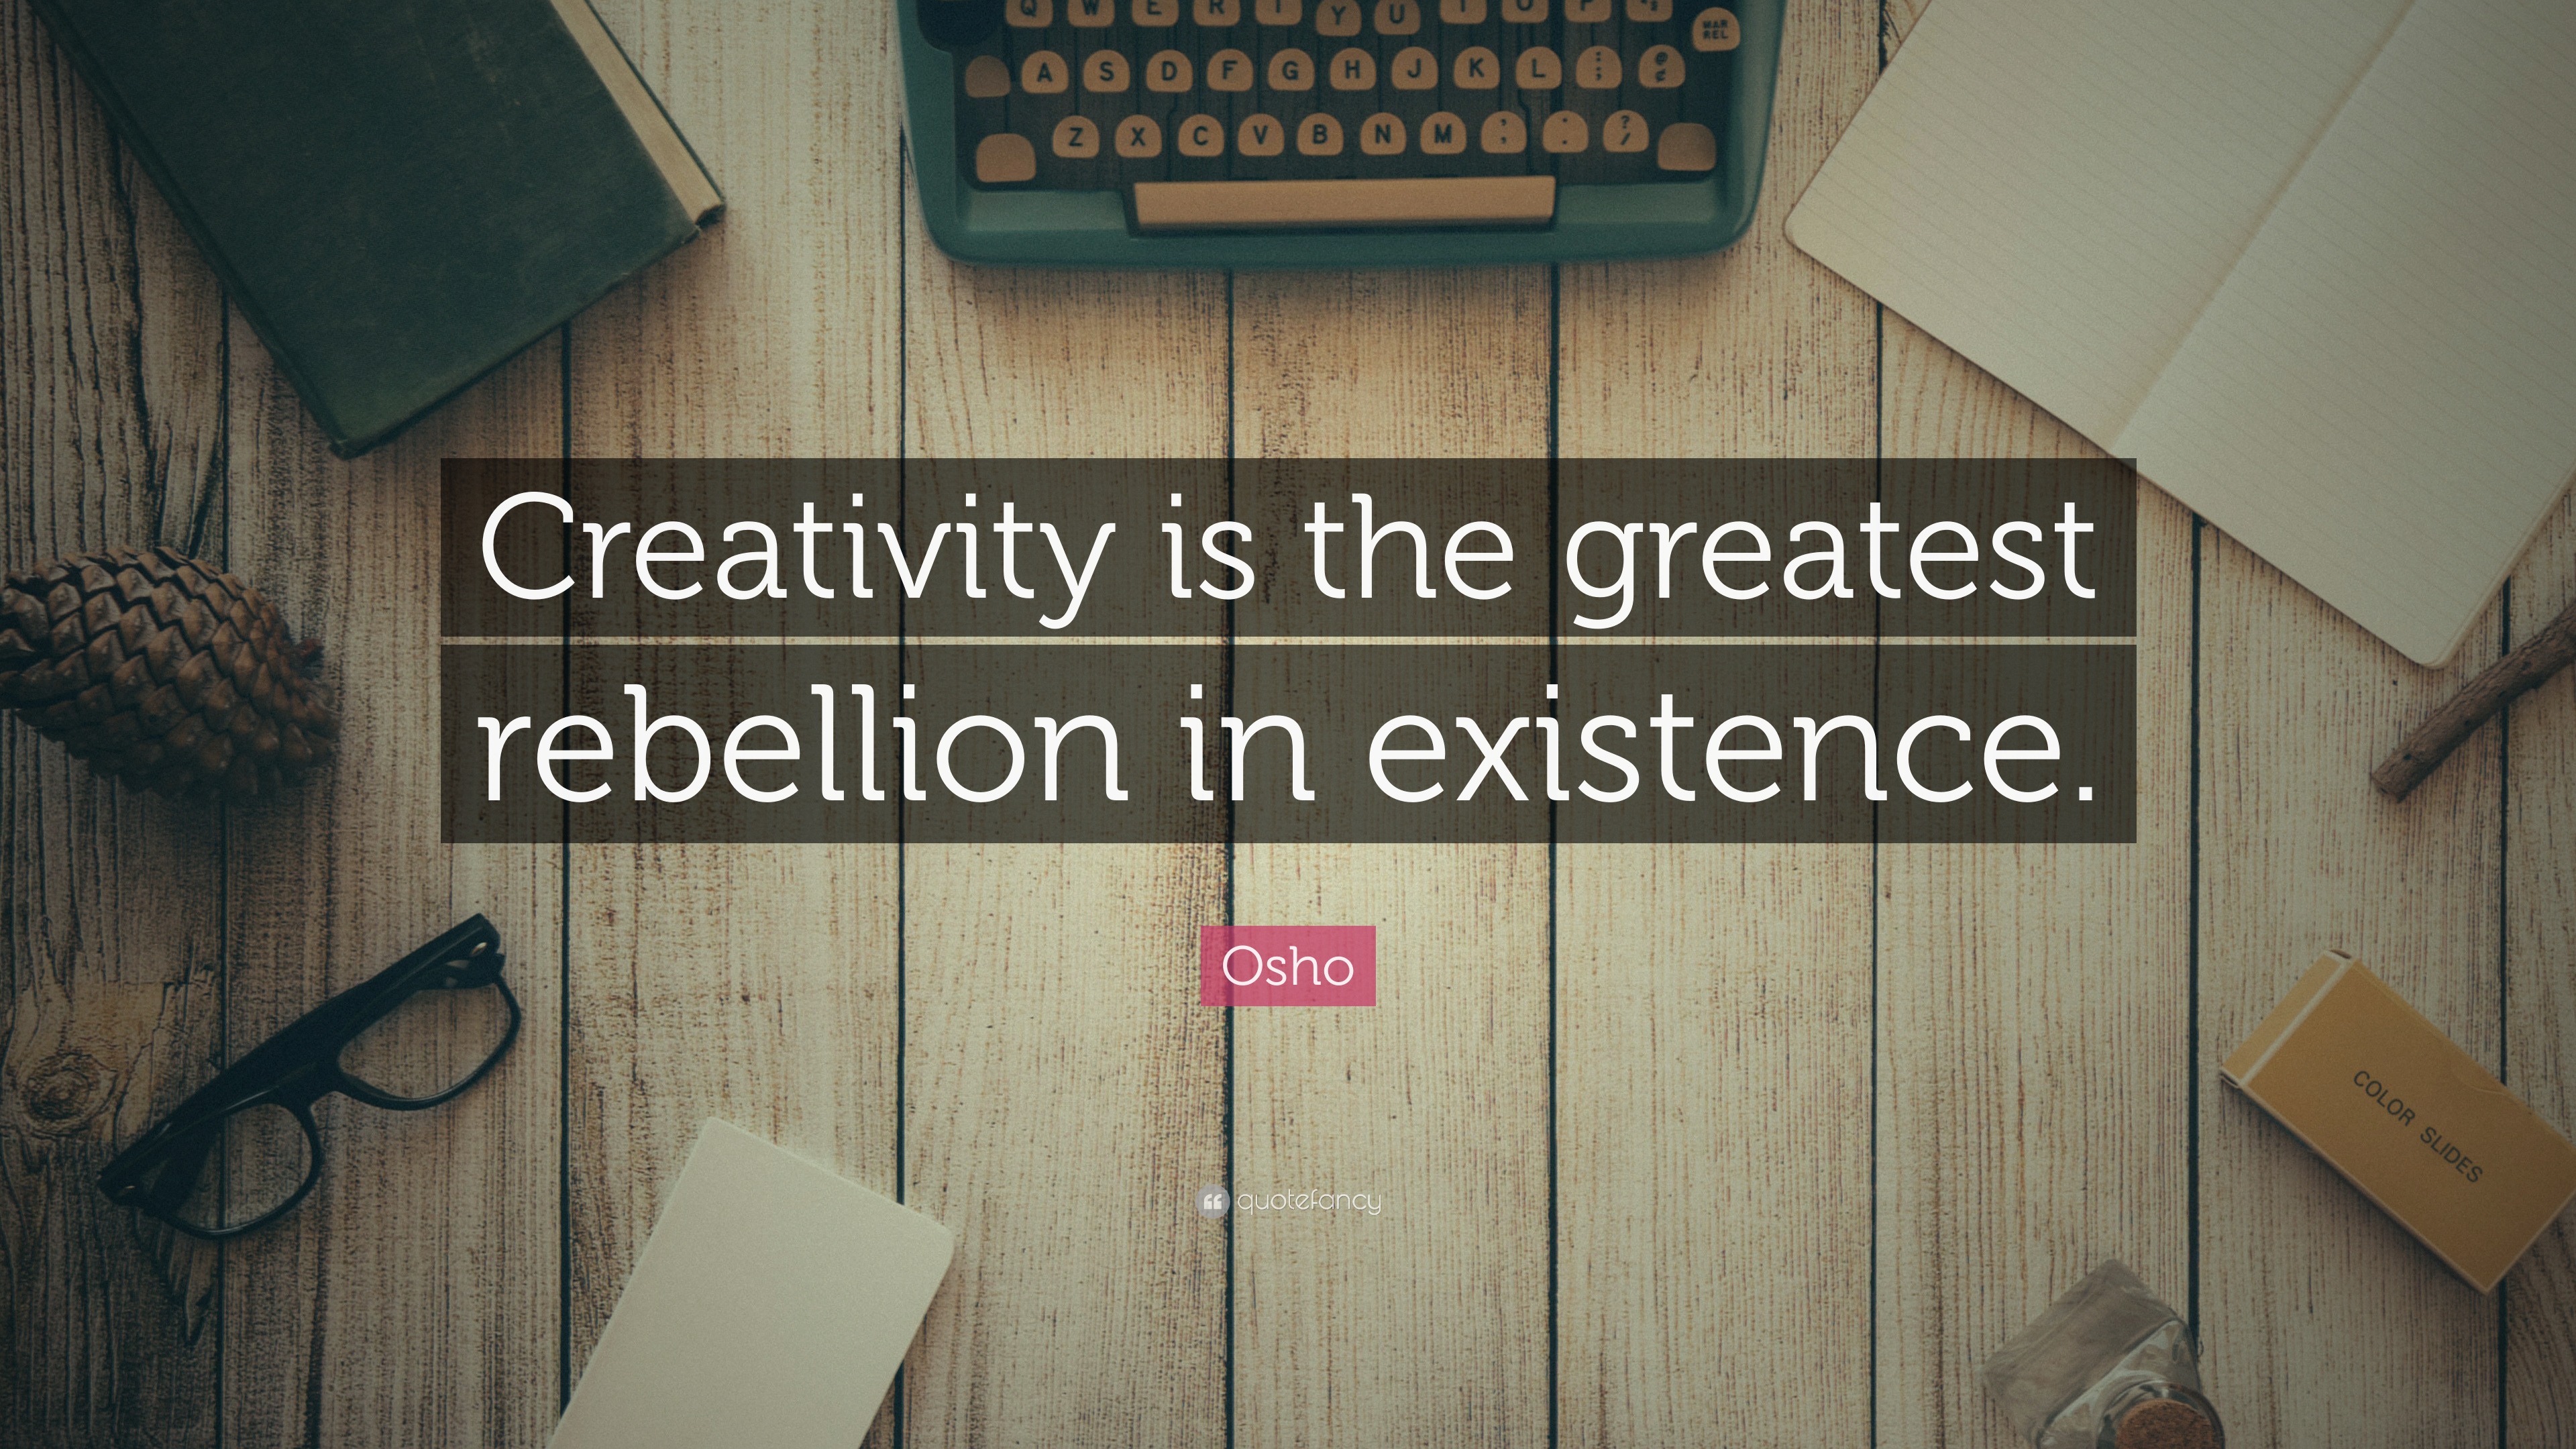 essay on creativity is the greatest rebellion in existence